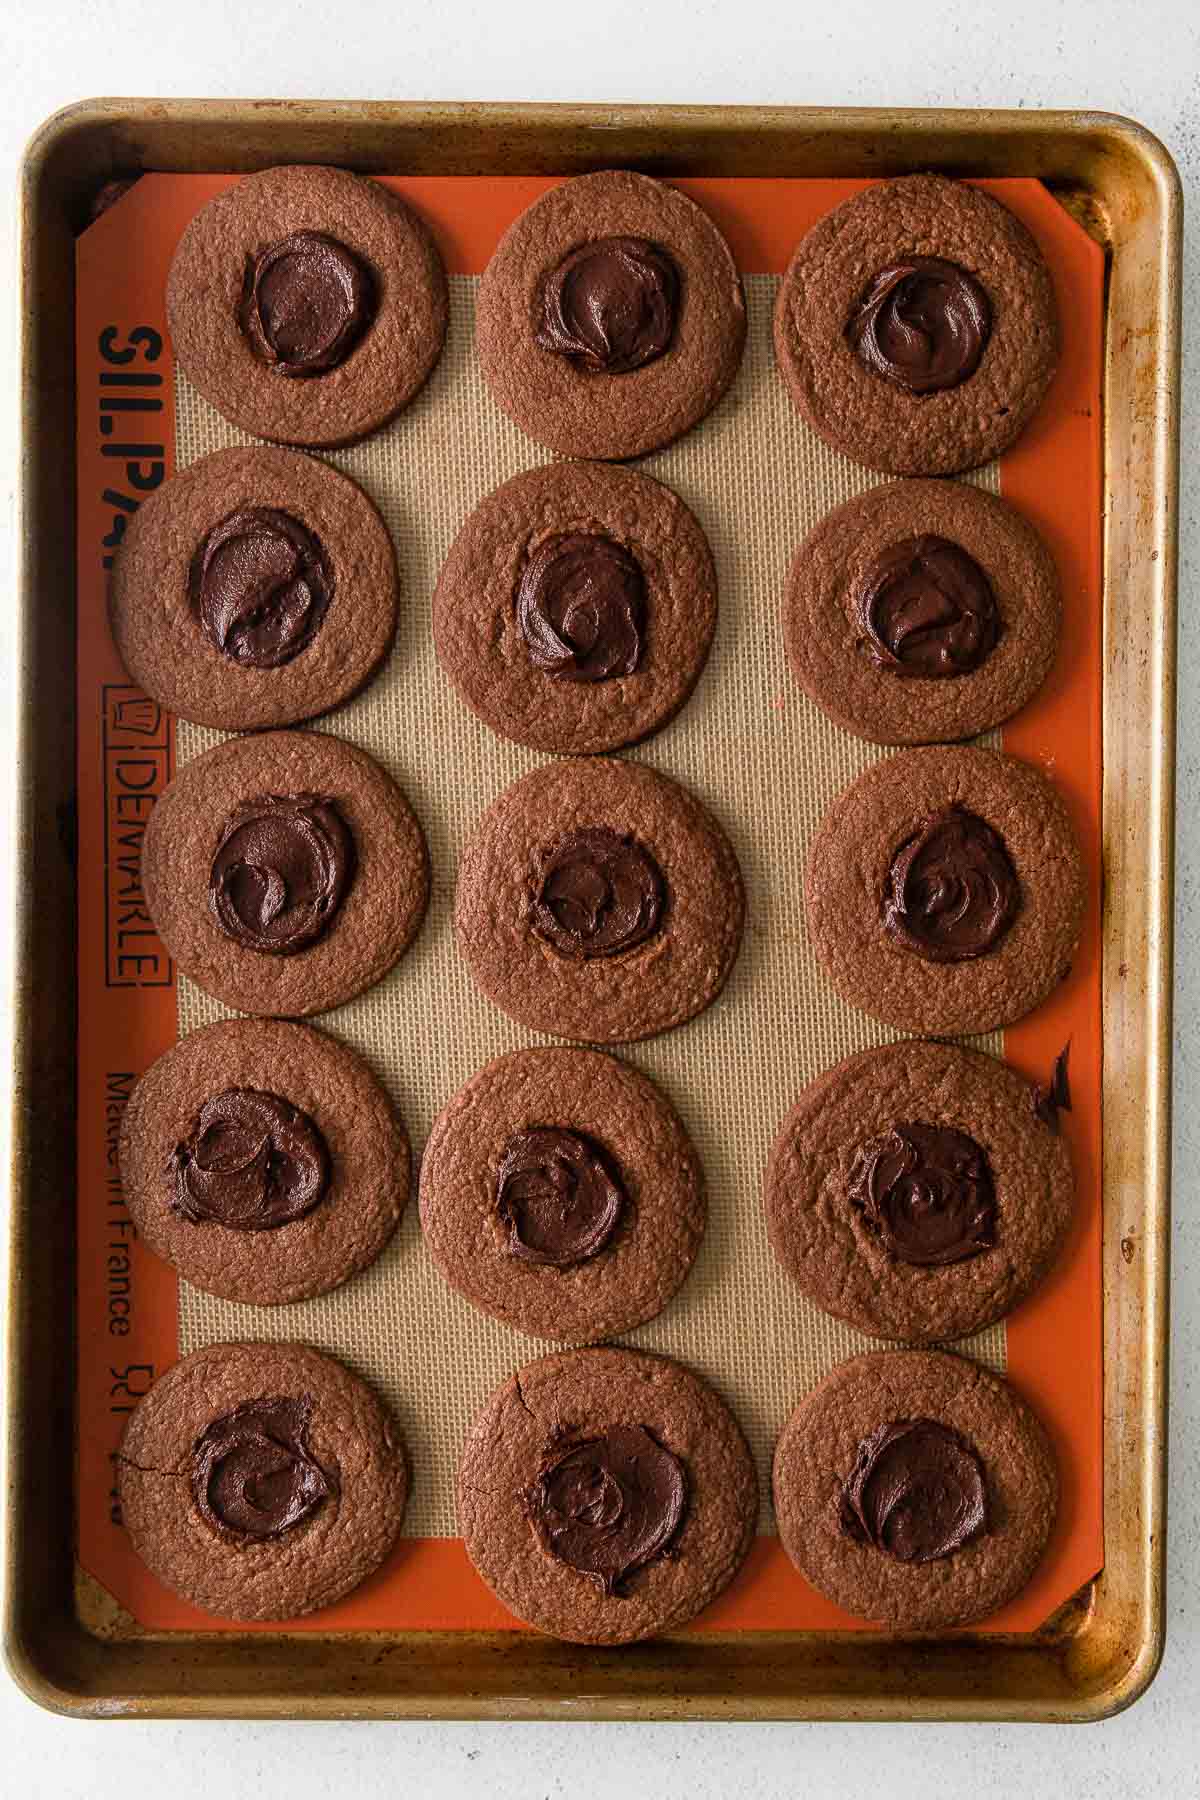 fifteen chocolate thumbprint cookies with chocolate ganache filling.